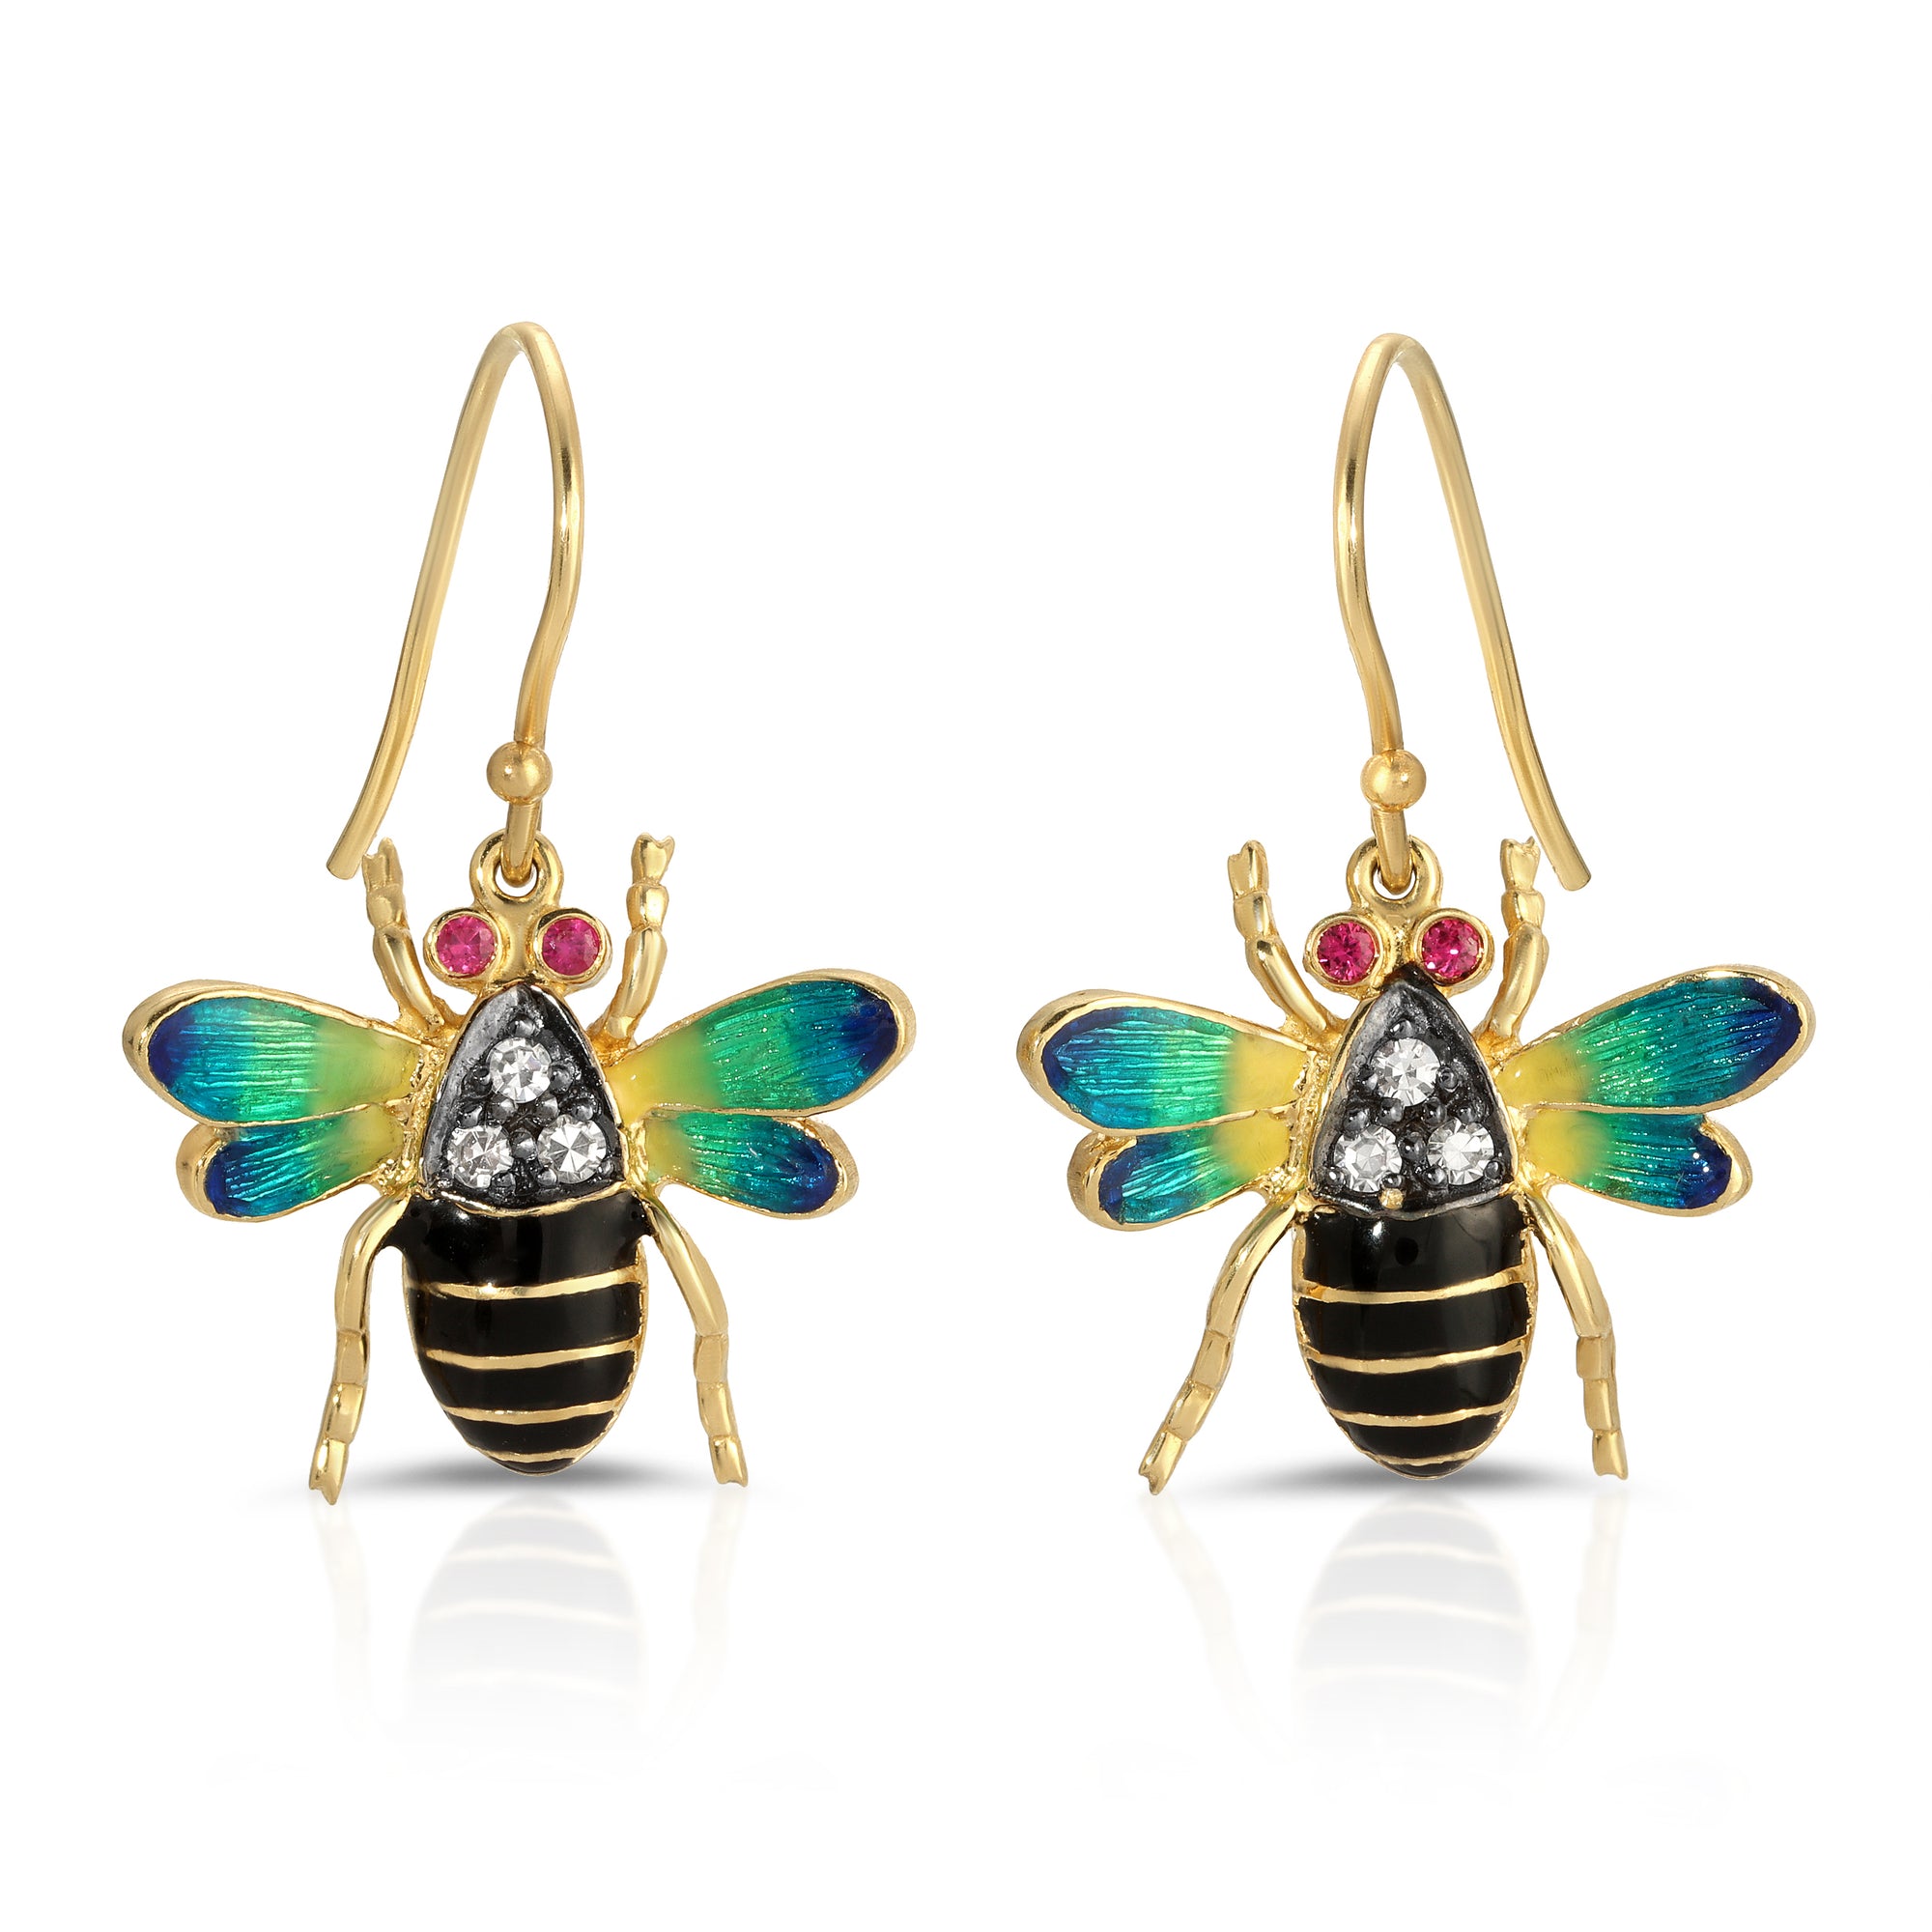 Enameled Bumble Bee Drop Earrings by Lord Jewelry available at Talisman Collection Fine Jewelers in El Dorado Hills, CA and online. Darling Bumble Bee Drop Earrings exude enchanting charm... These petite wonders with ombre blue-green enamel wings are crafted in 18k yellow gold. With a touch of sparkle from 0.30 carats of diamonds and a dash of color with 0.10 carats of rubies, these whimsical earrings add a sweet and playful twist, making every day a bit brighter.